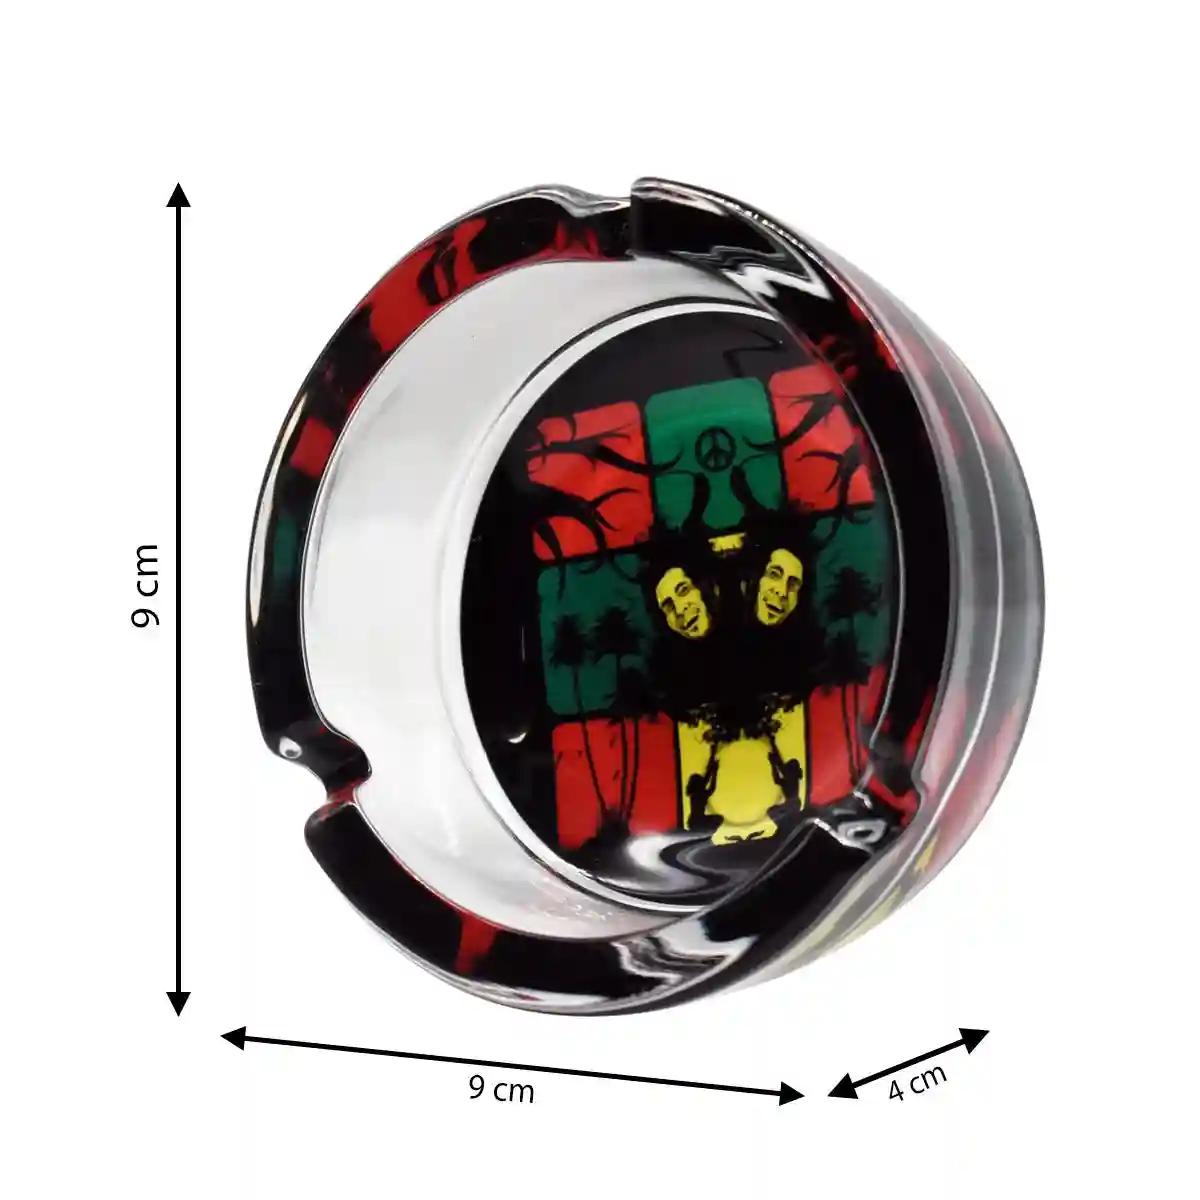 Kookee Glass Ashtray for Outdoor Indoor Transparent Modern Home Decor Tabletop Ashtray for Smokers, Round, Tree Print (Diameter: 8.5cm)